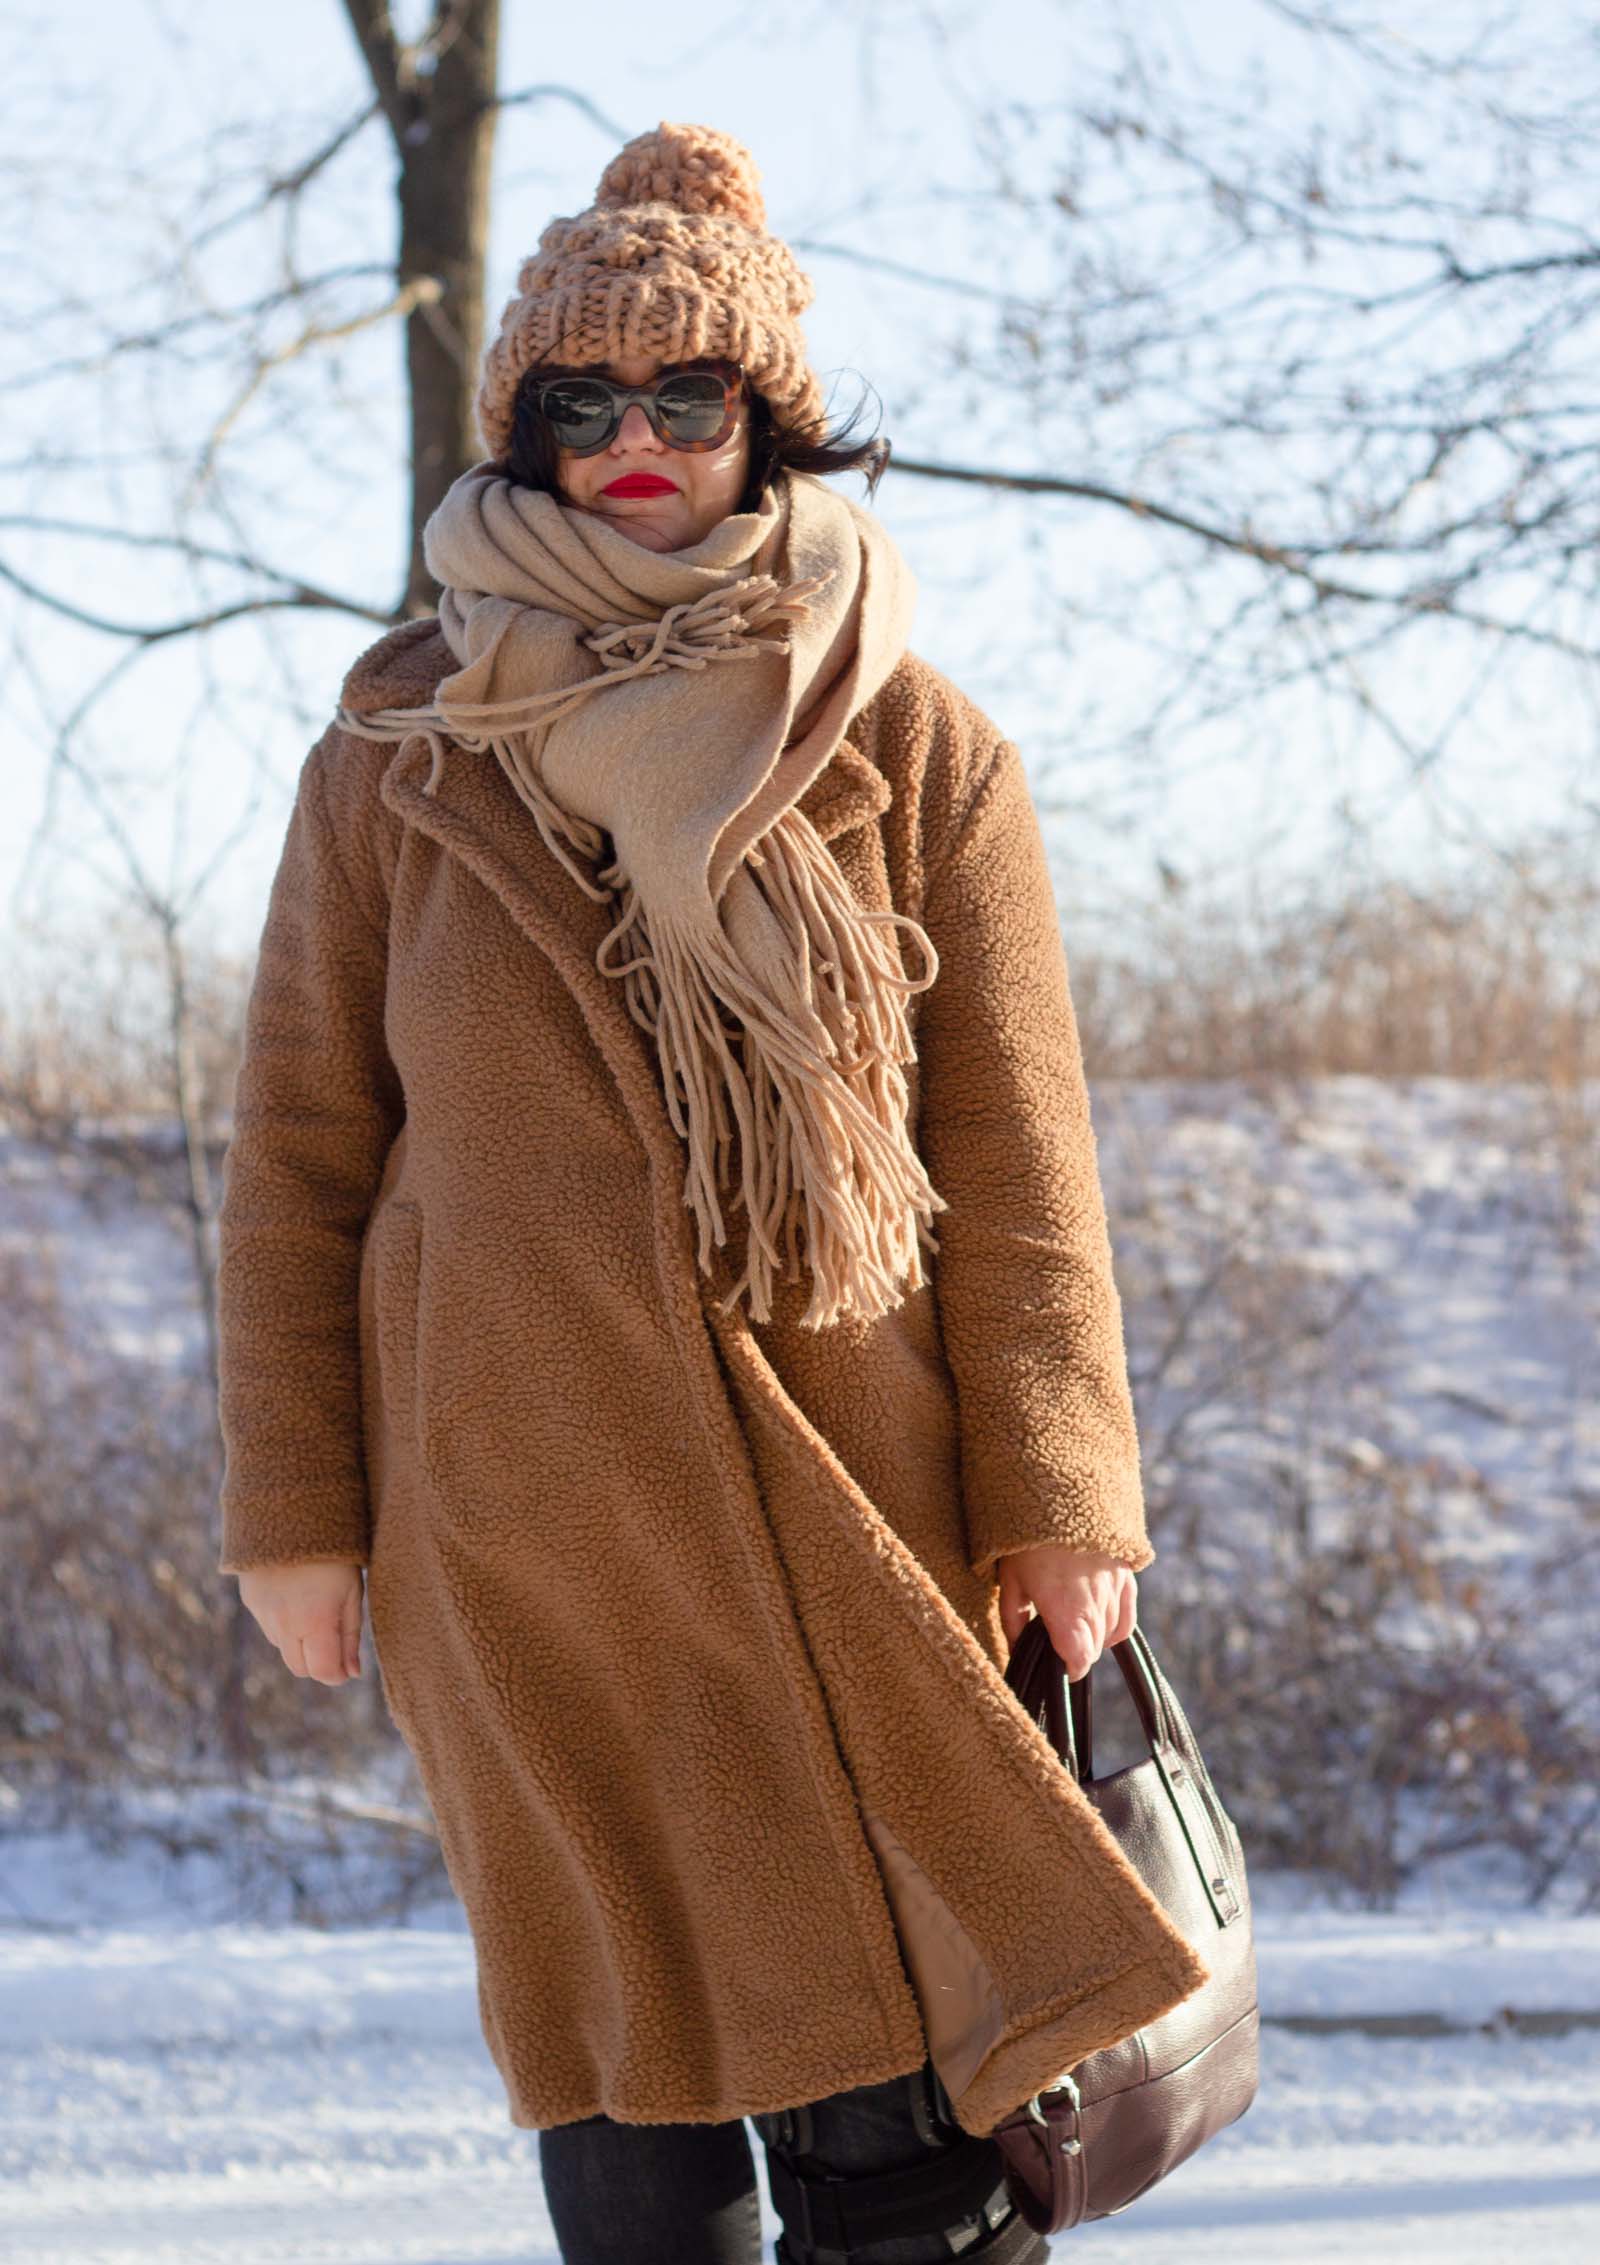 25 ways to survive a Canadian winter